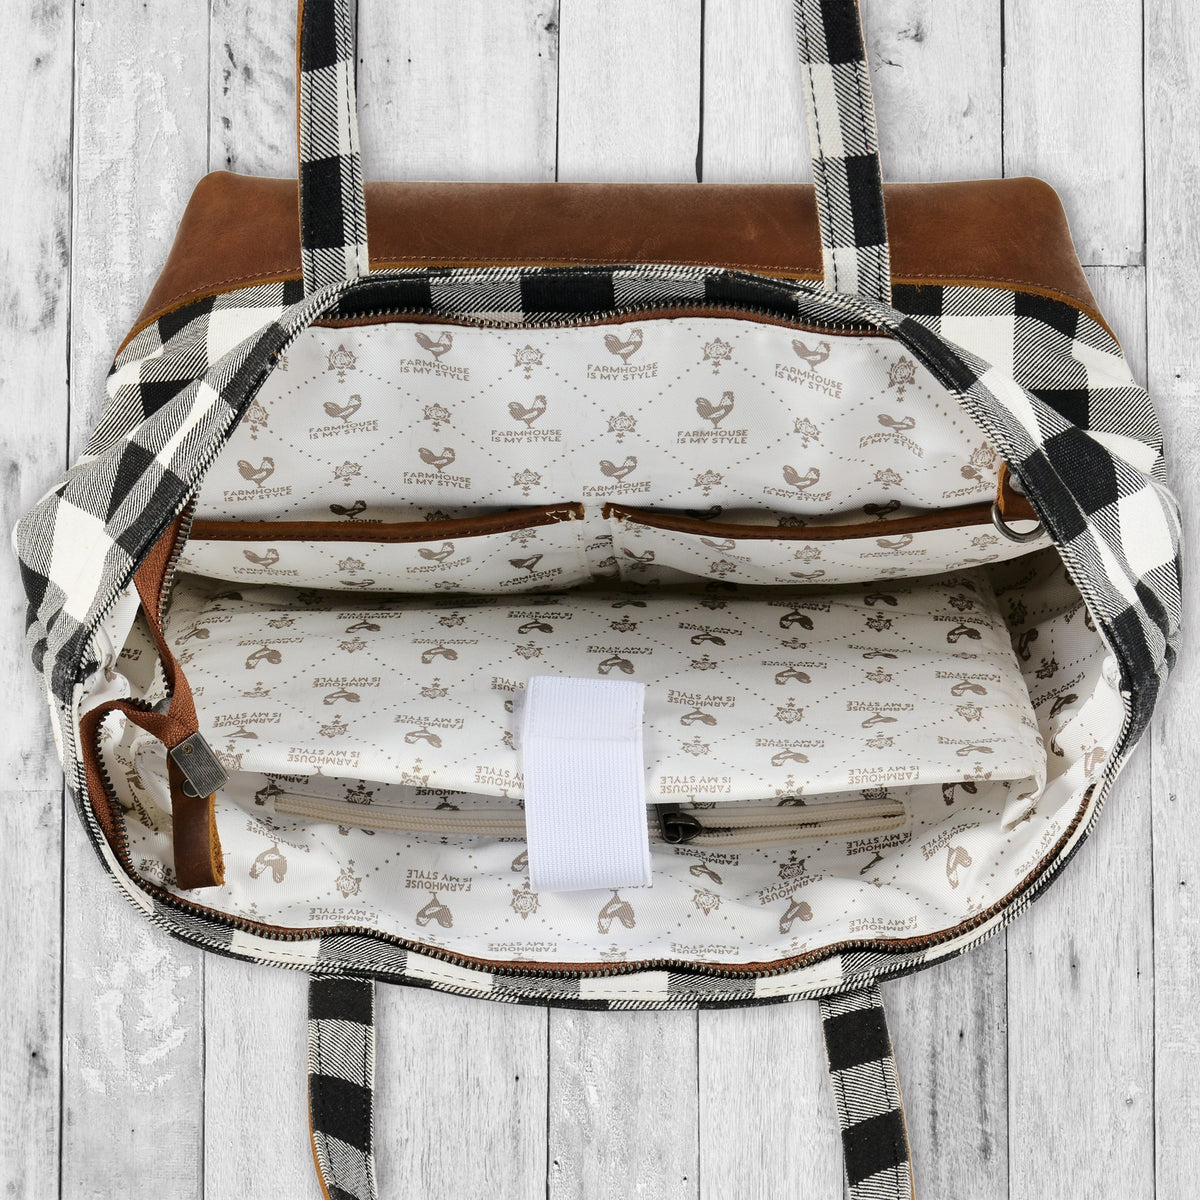 Classic Black And White Check Farmhouse Hand Bag, Shoulder Bag, Tote, Purse  - Farmhouse Is My Style